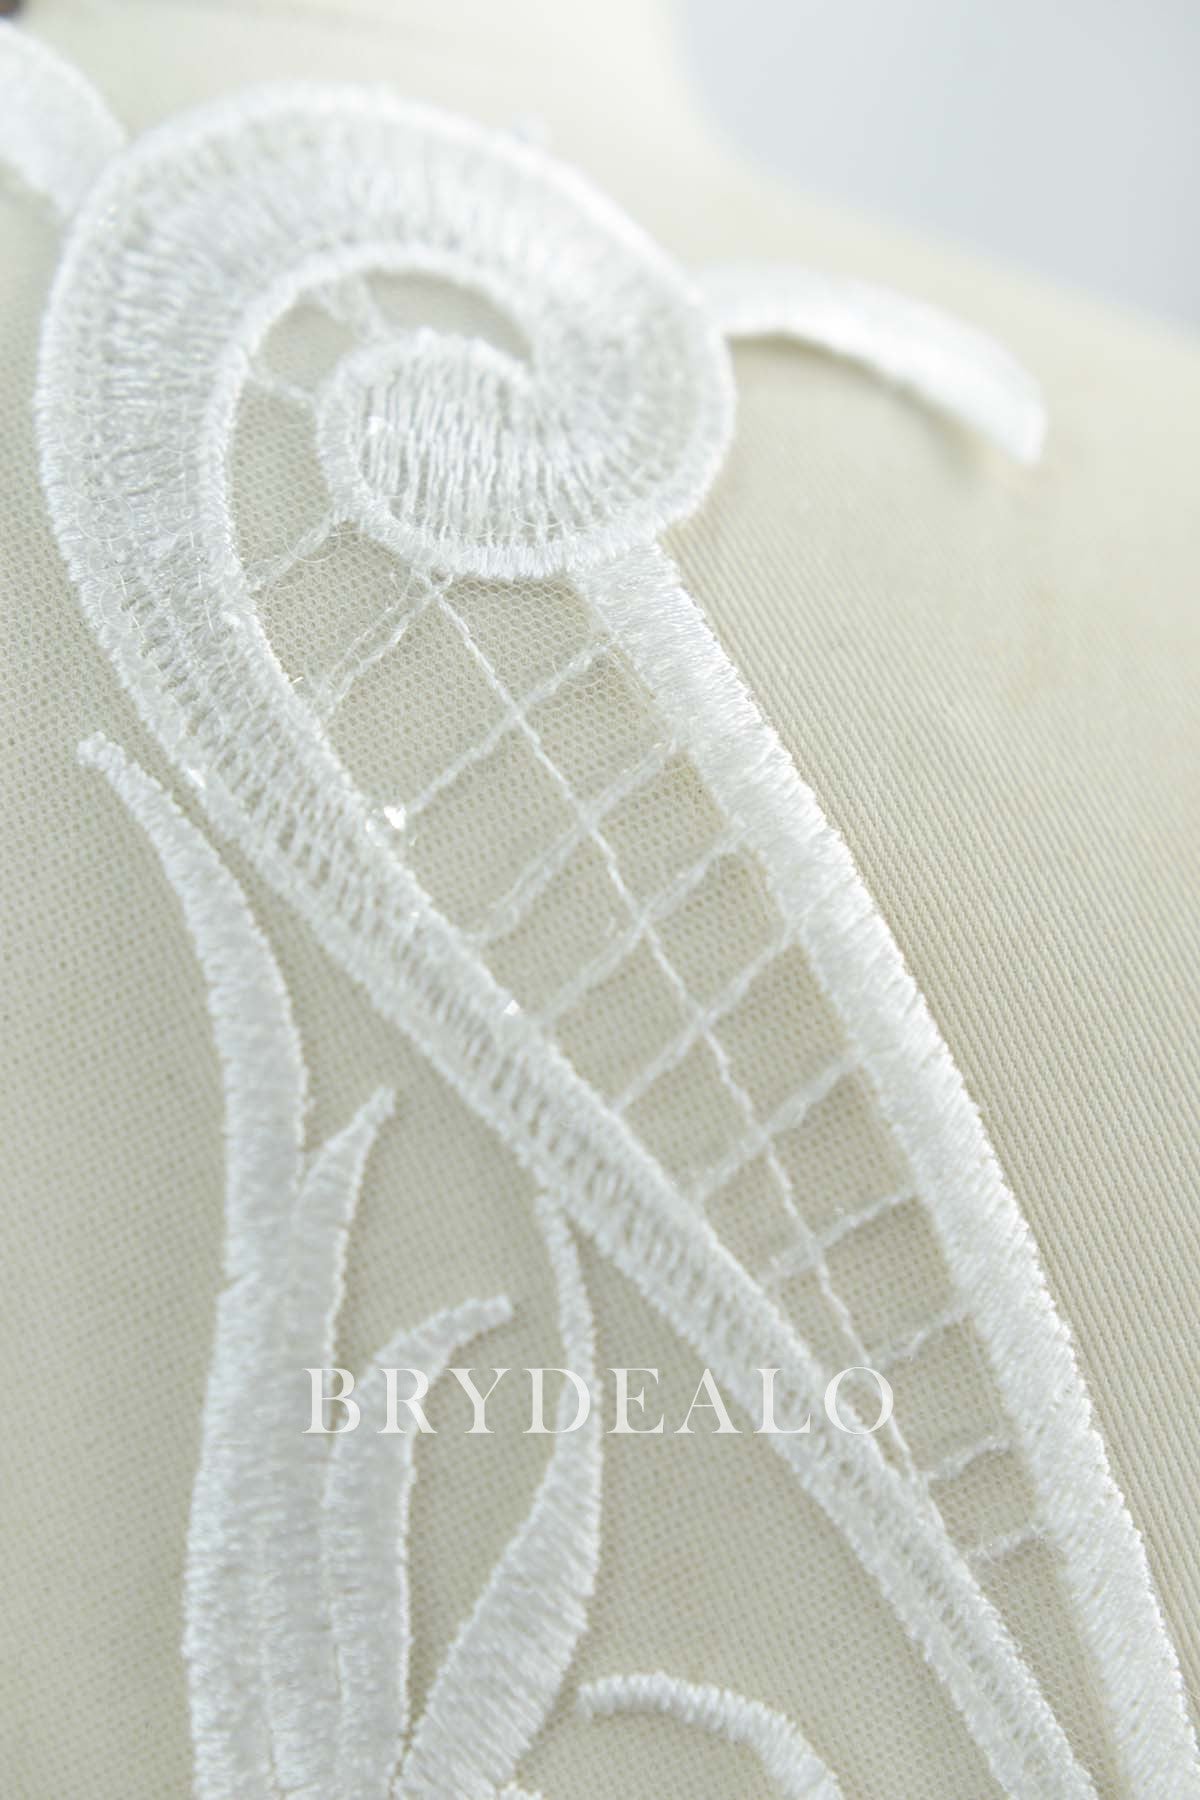 Abstract Patterned Bridal Lace Appliqué